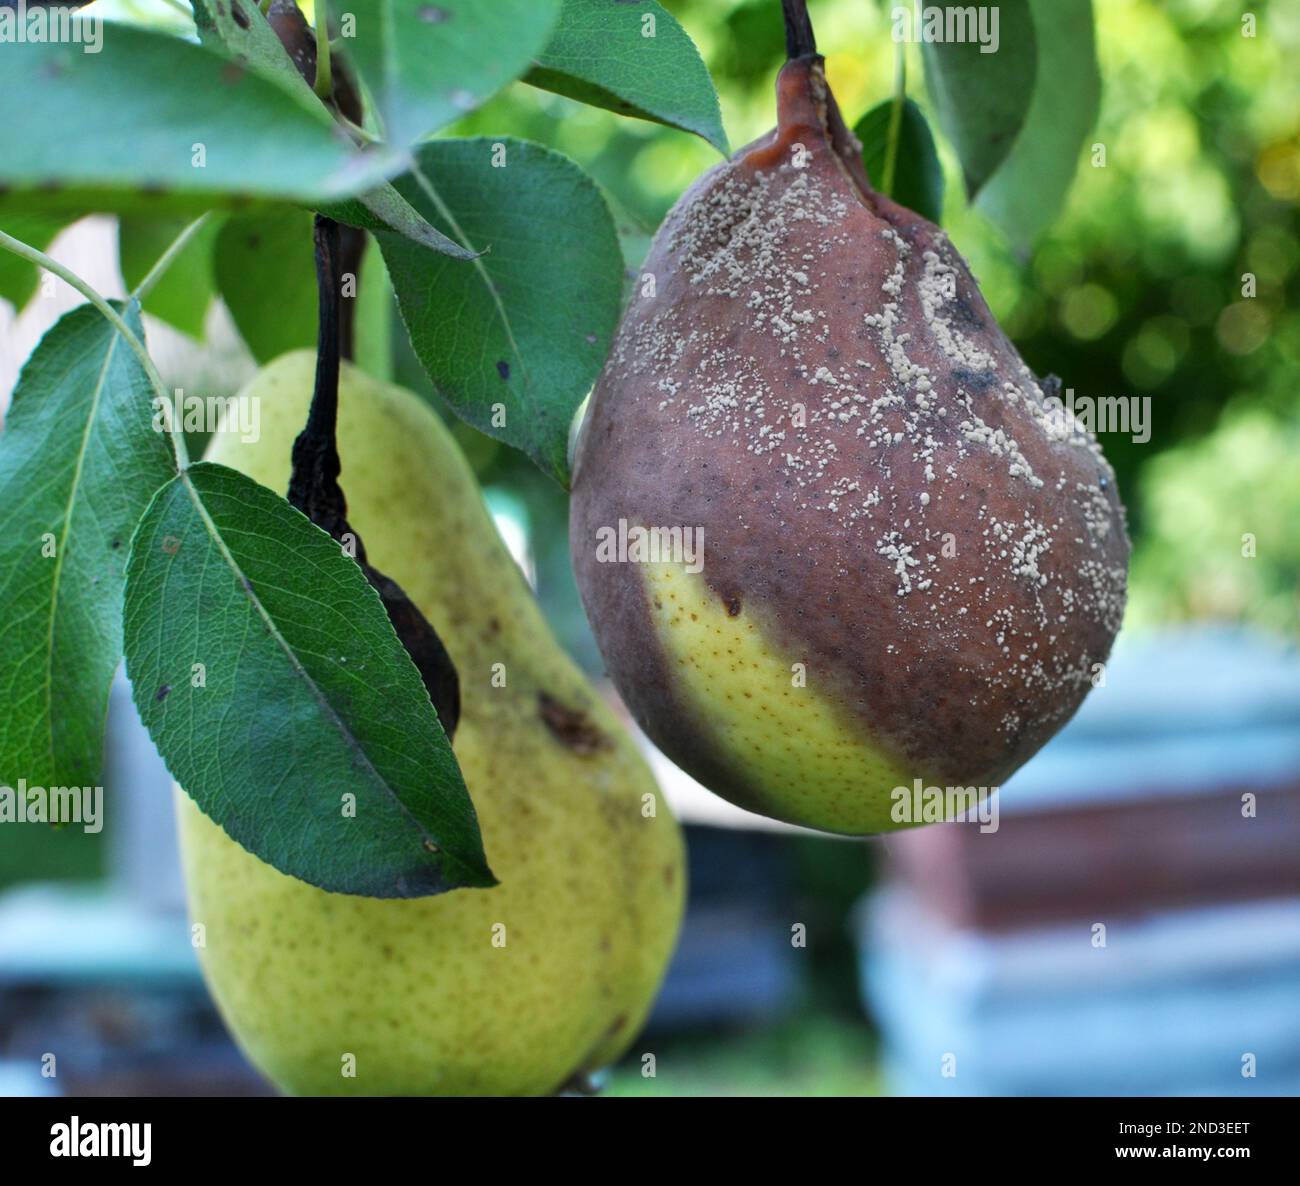 Pear fruits are infected with the fungus Monilinia fructigena Stock Photo